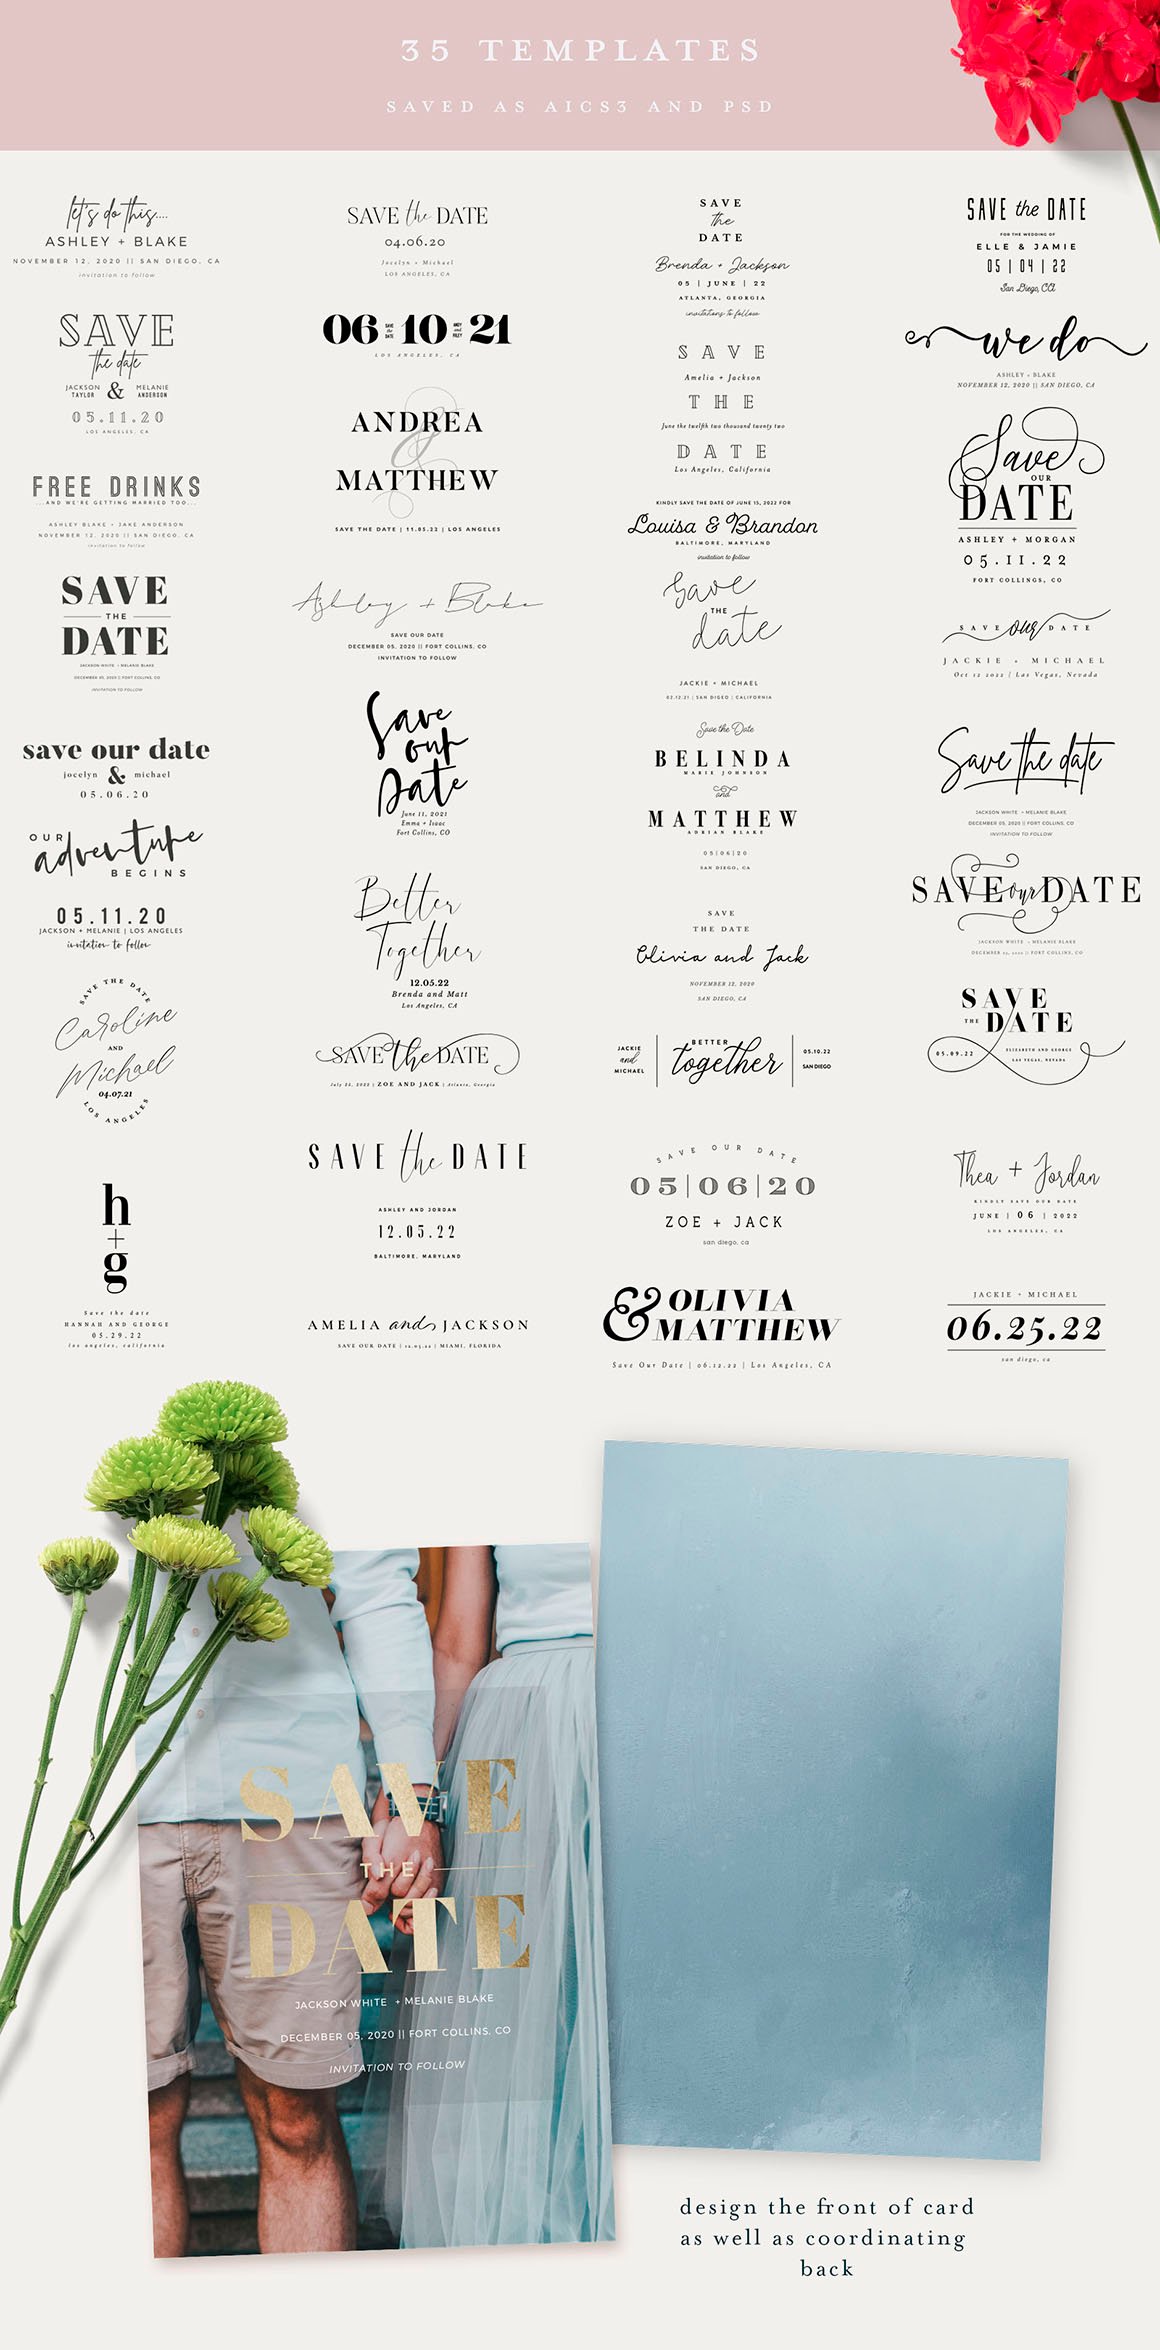 Essential Save the Date Collections